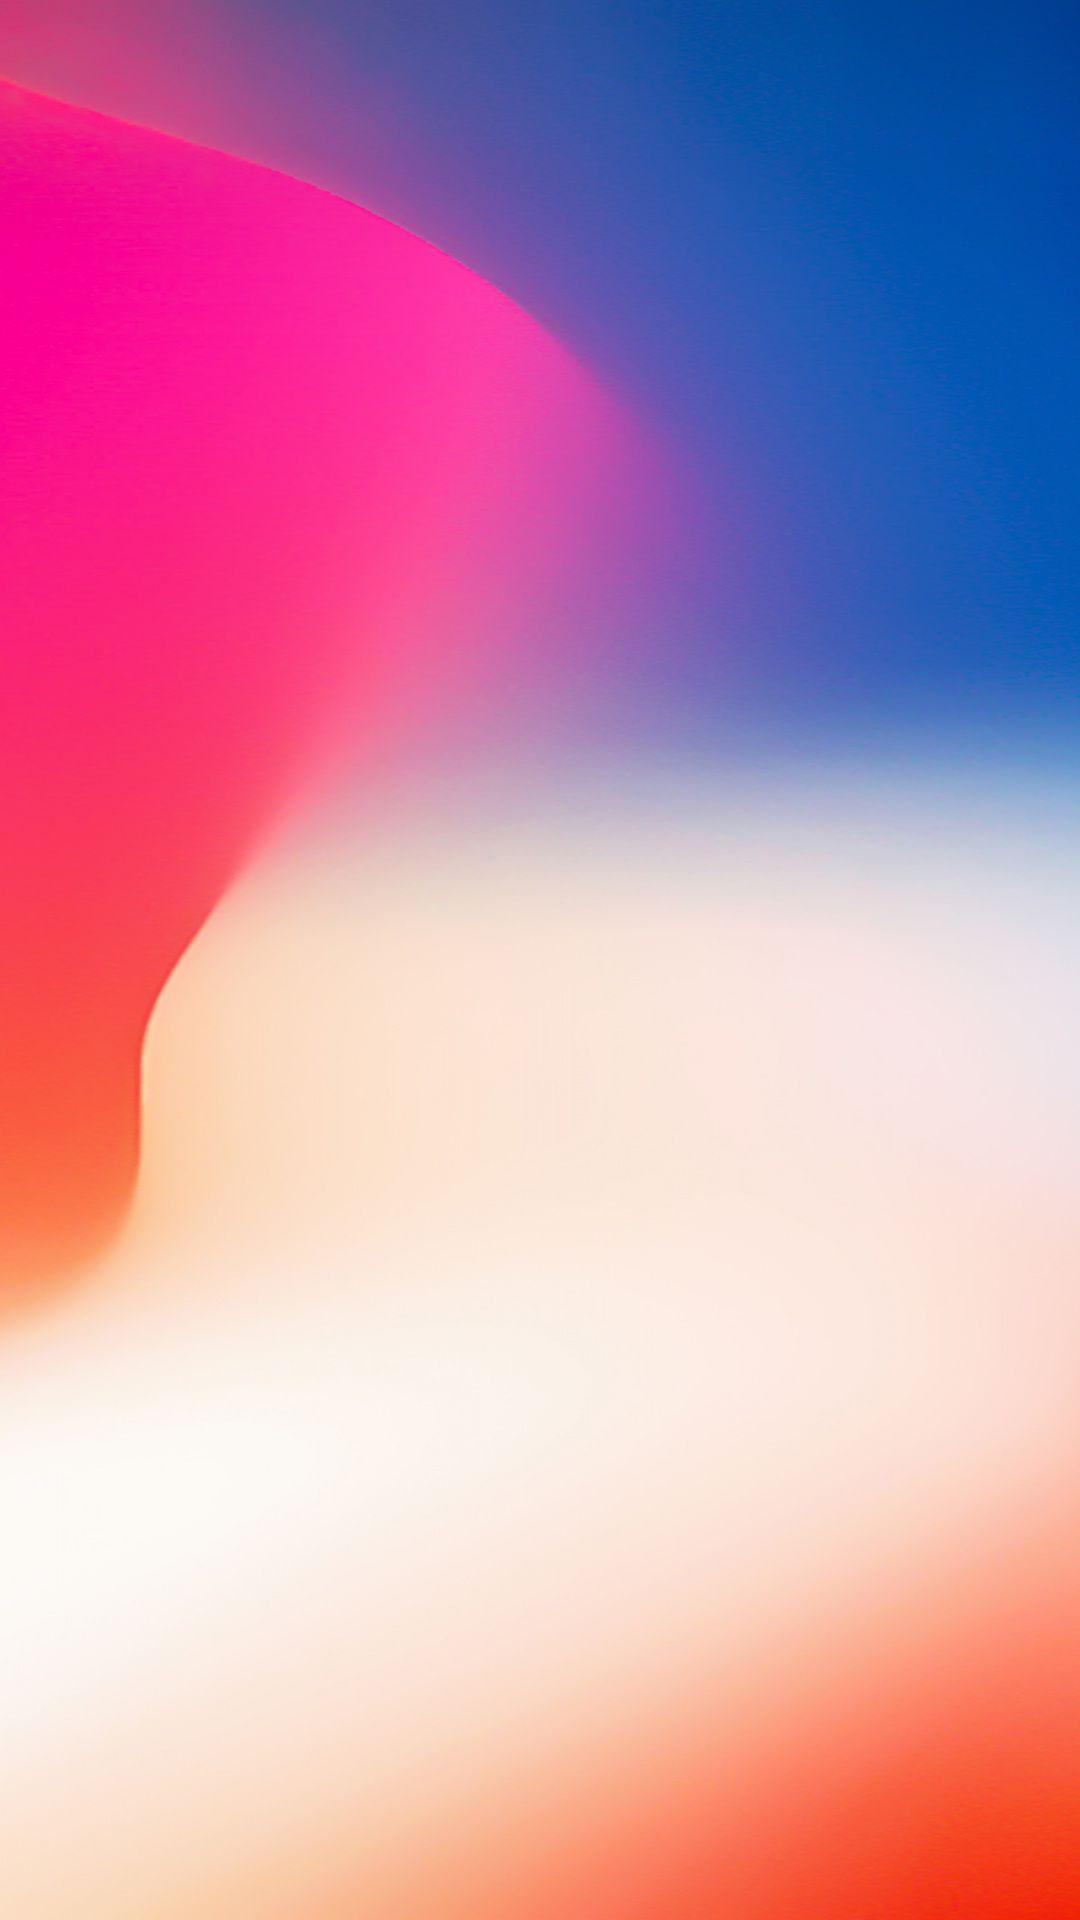 iPhone x, stock, colorful gradient, abstract, 1080x1920